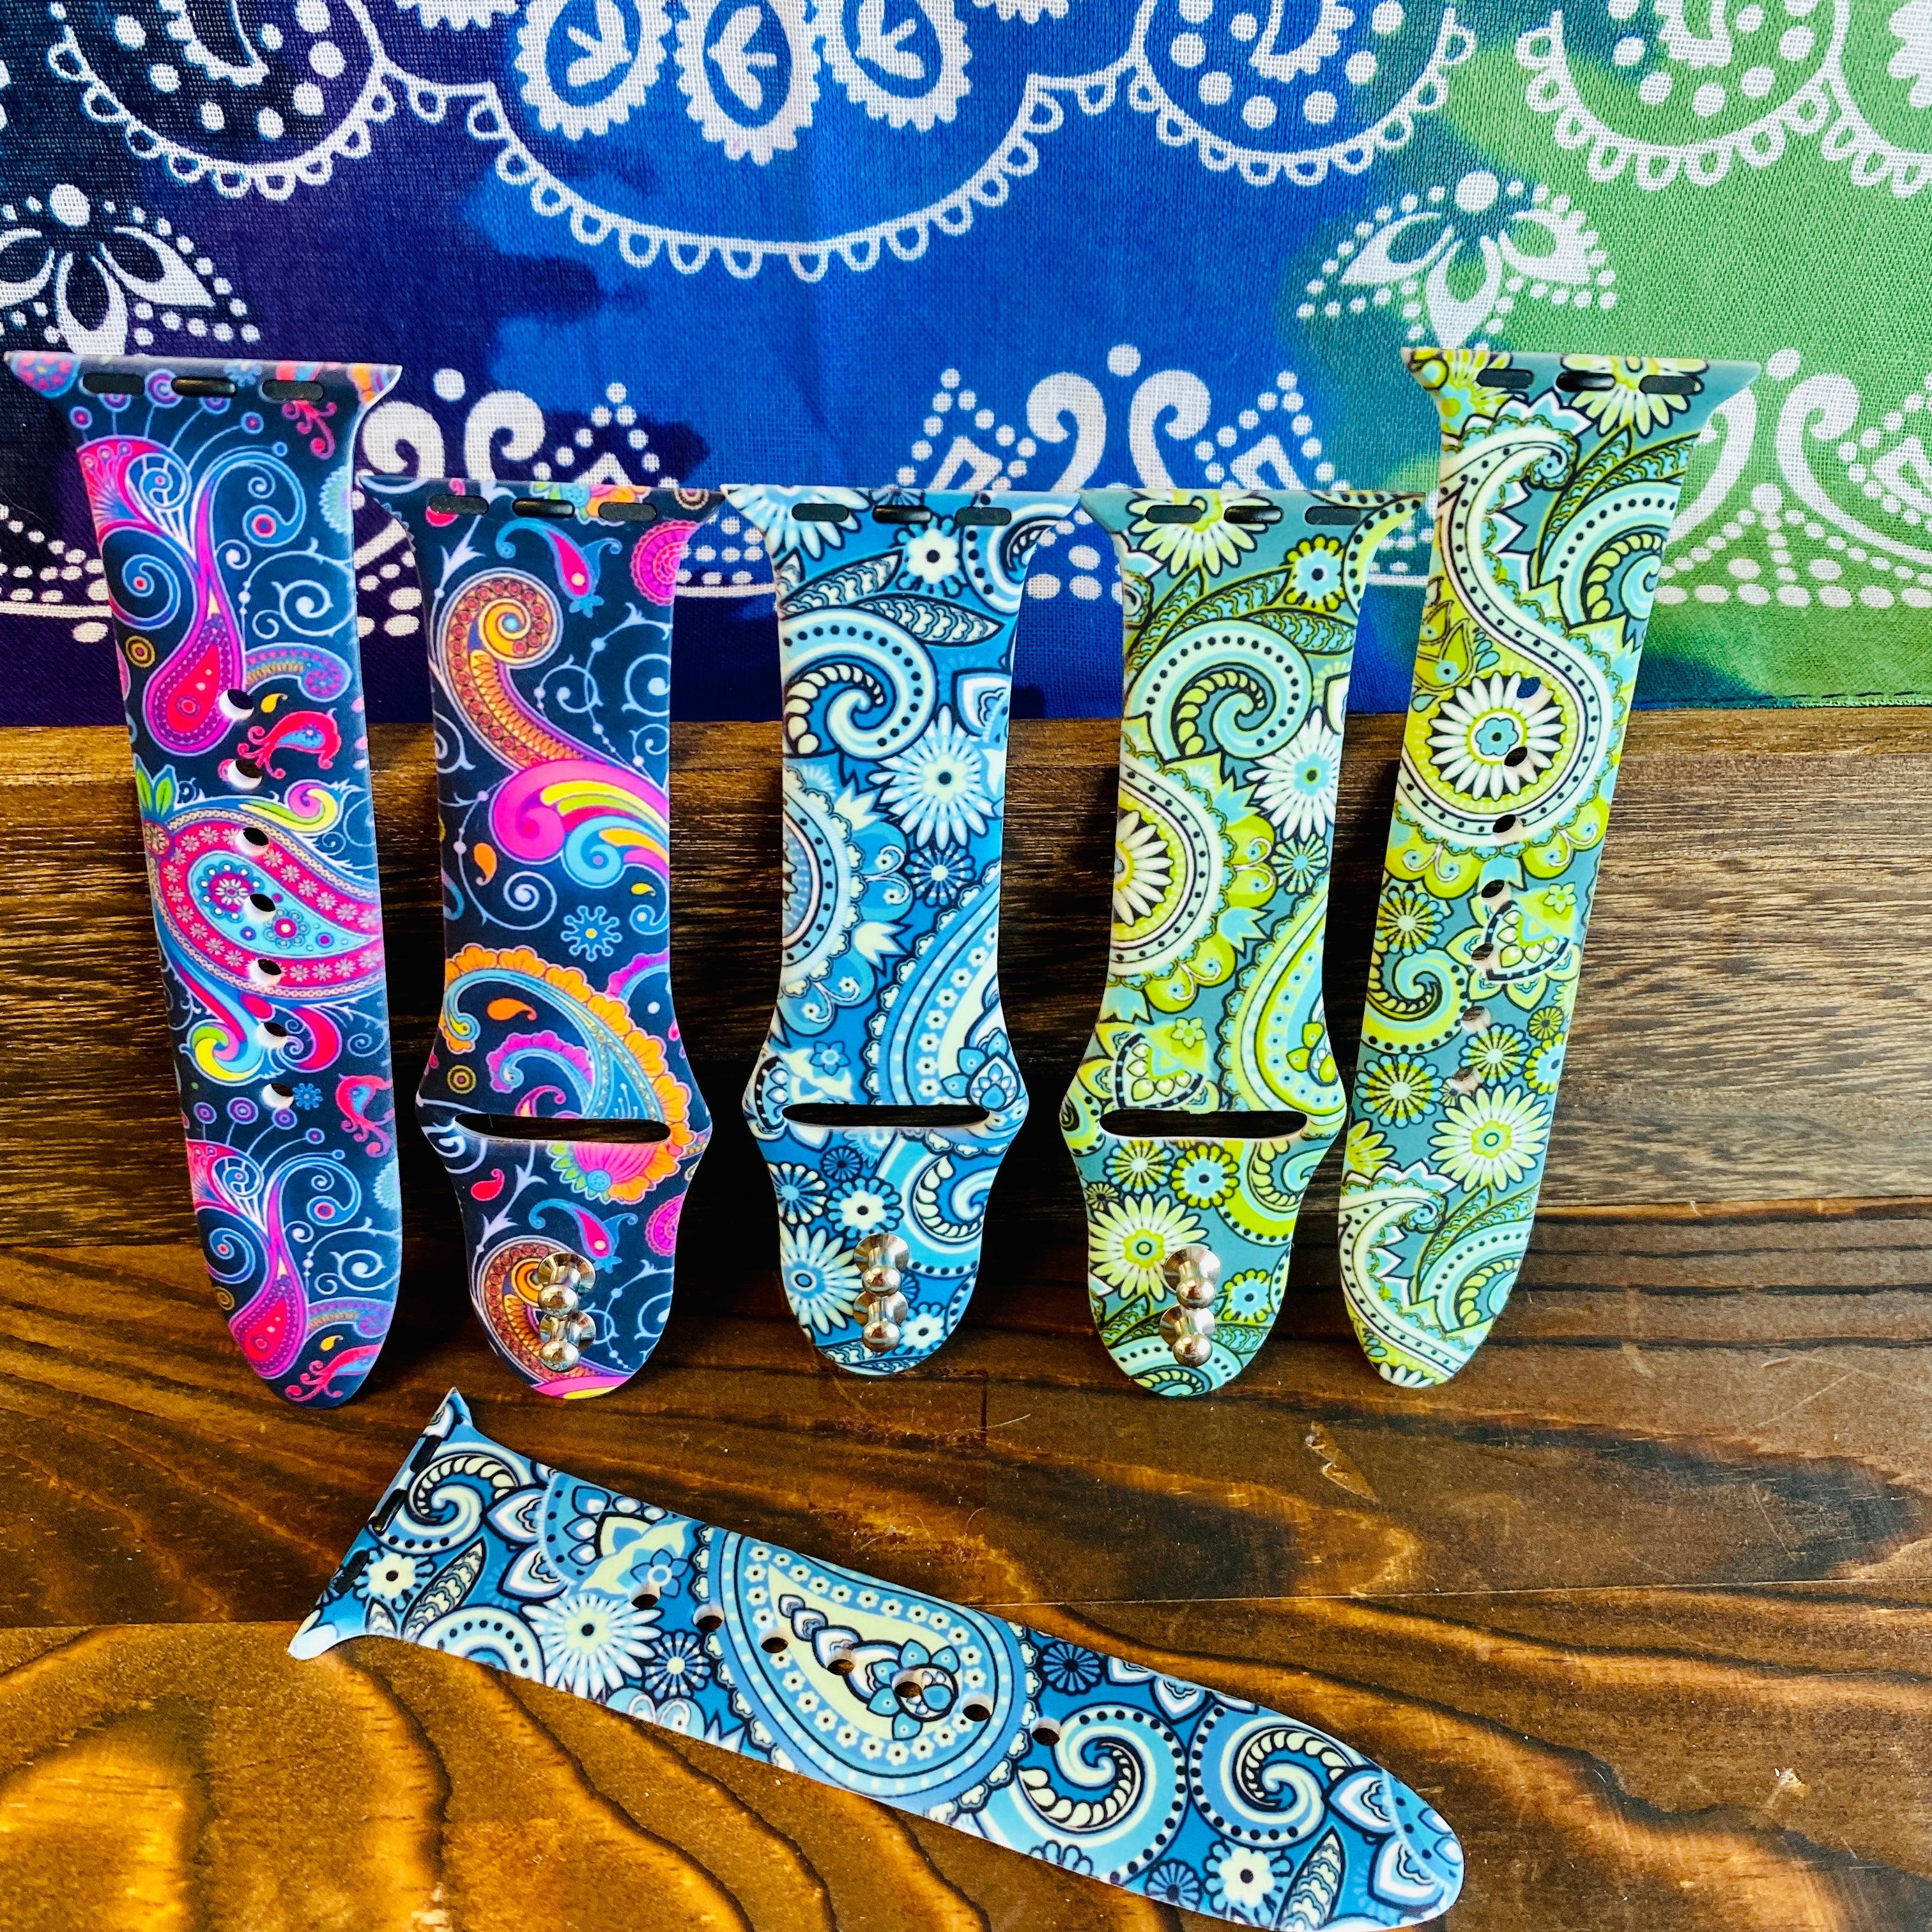 Fancy Bands Colorful Paisley Silicone Apple Watch Band